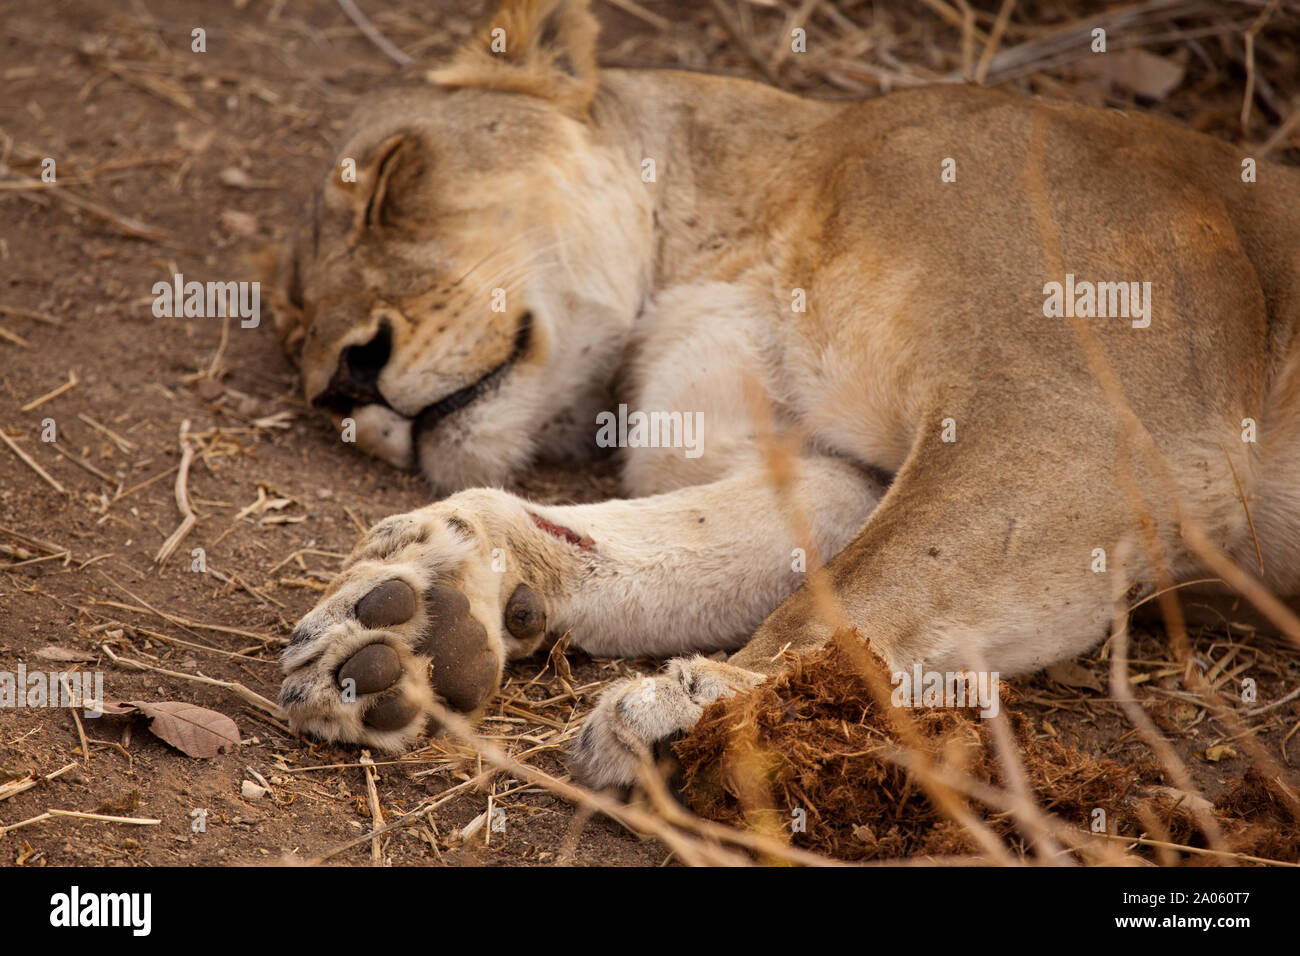 Lioness asleep in Ruaha national park, Tanzania.  A relatively recent wound can be see on its right front paw which can be up to 13 cm wide. Stock Photo